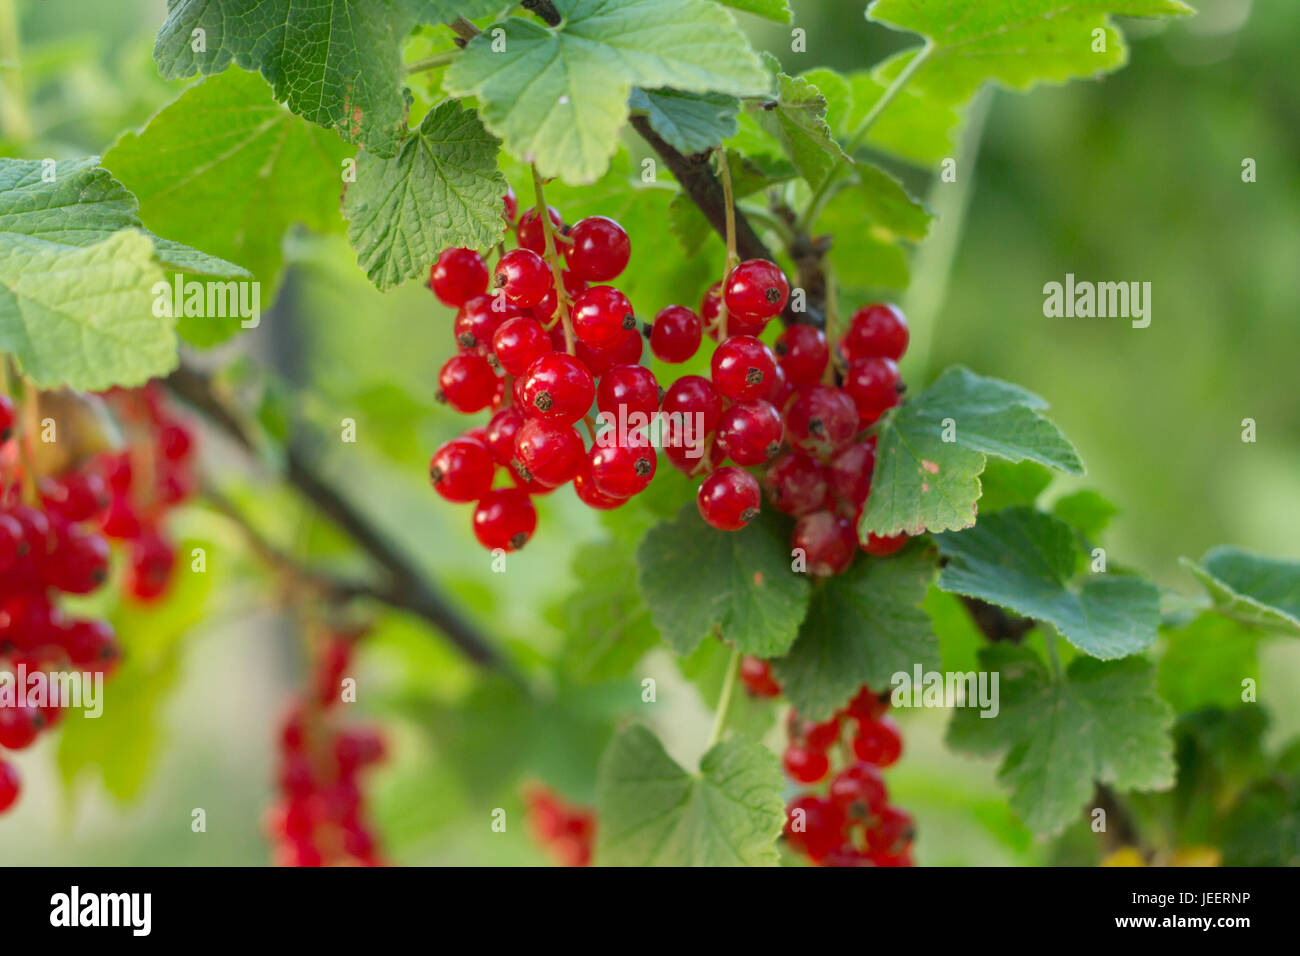 Branch of ripe currant in garden Stock Photo